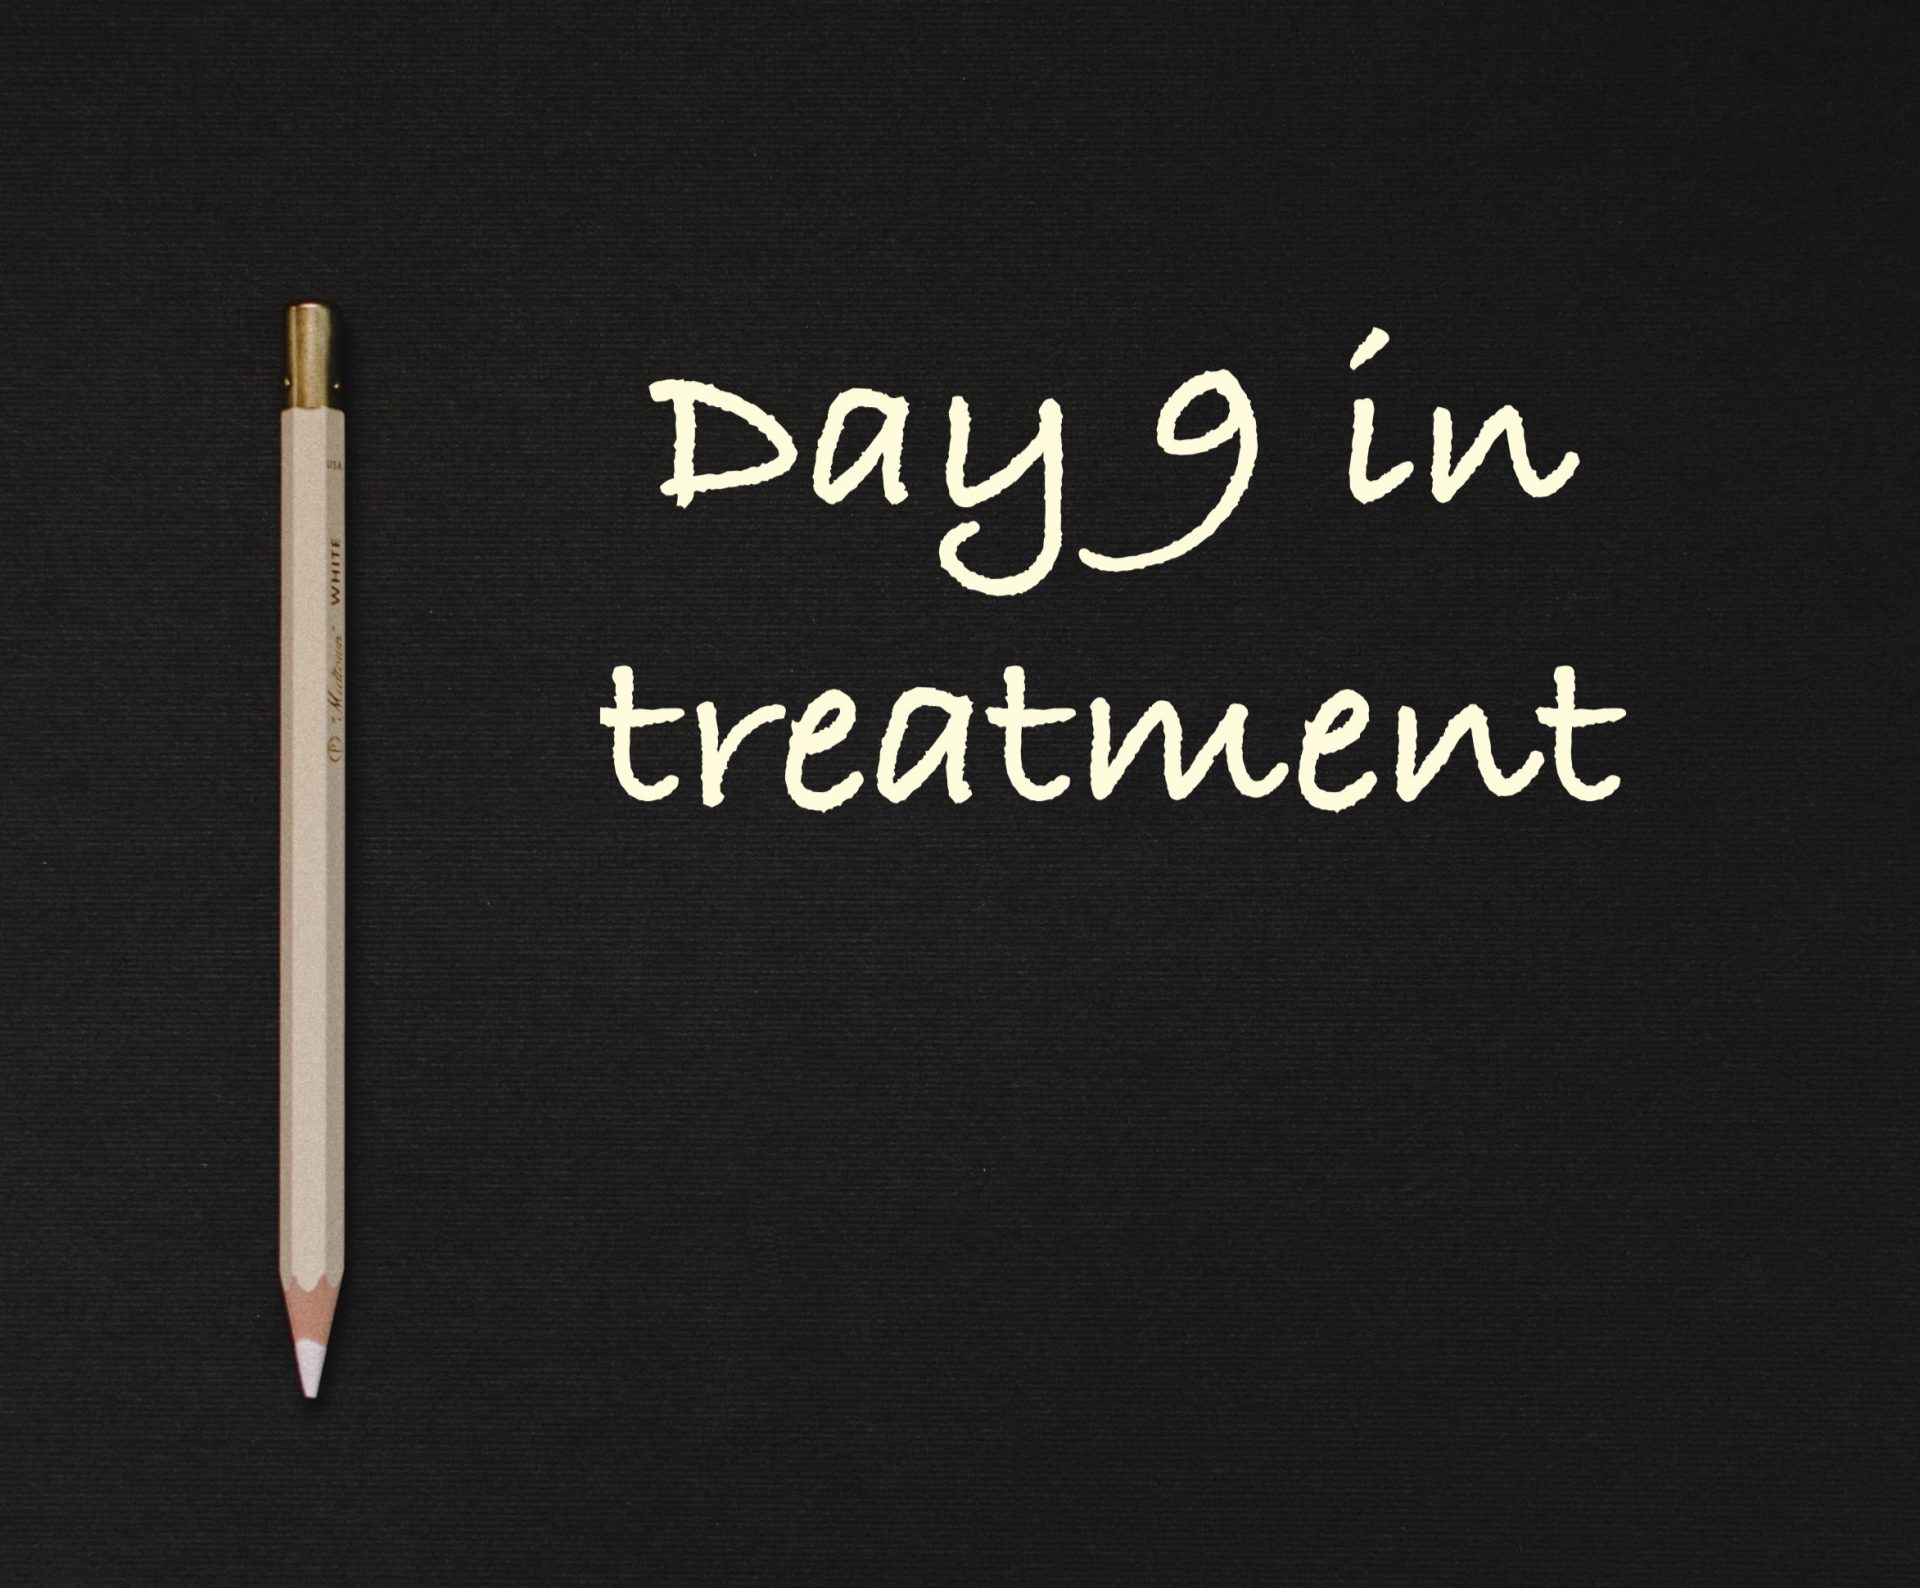 Day 9 in treatment